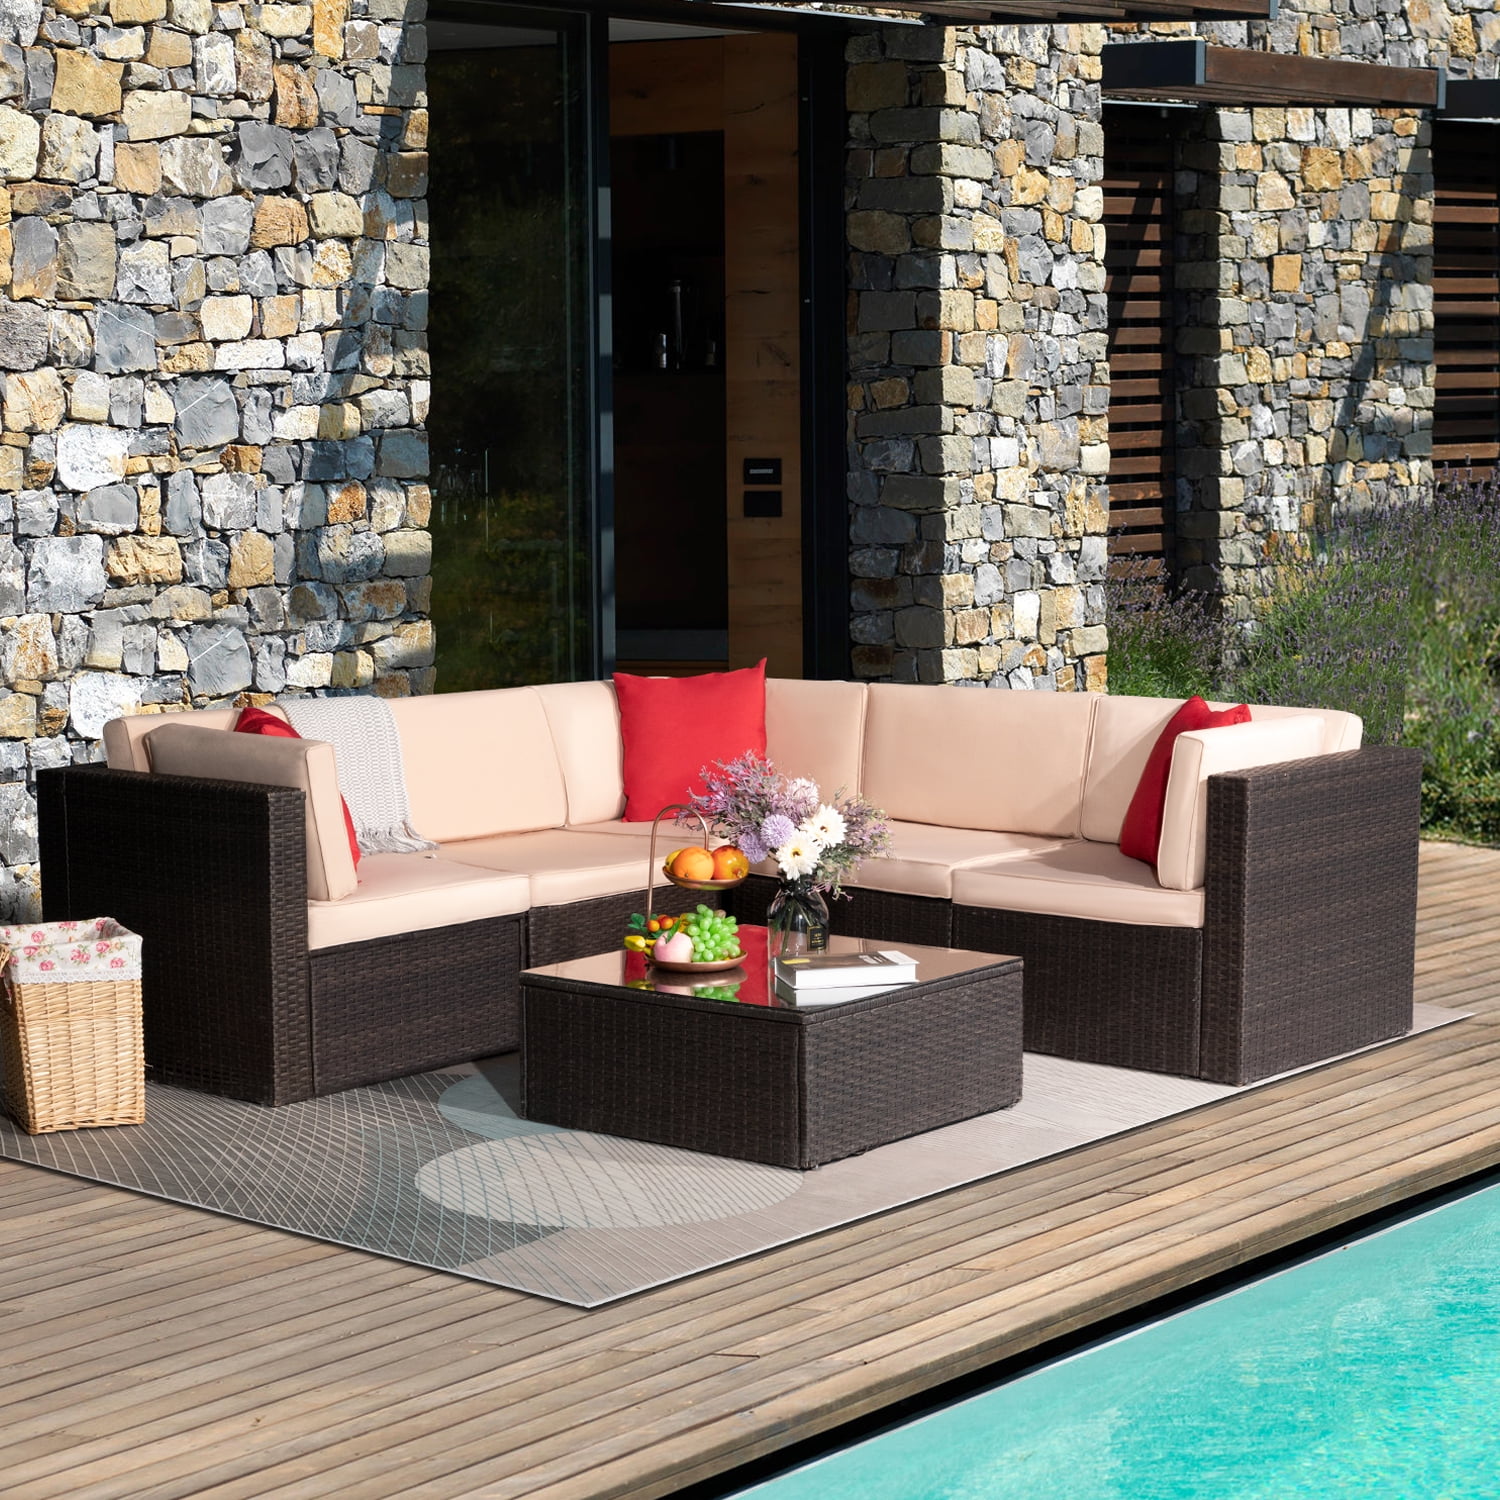 Poolside,Backyard Brown Rattan&Teal Cushion Porch New 6pcs Patio Outdoor Furniture Sets,PE Rattan Wicker Sofa Set,Patio Conversation Sets with Thick Cushion and Glass Table for Garden 